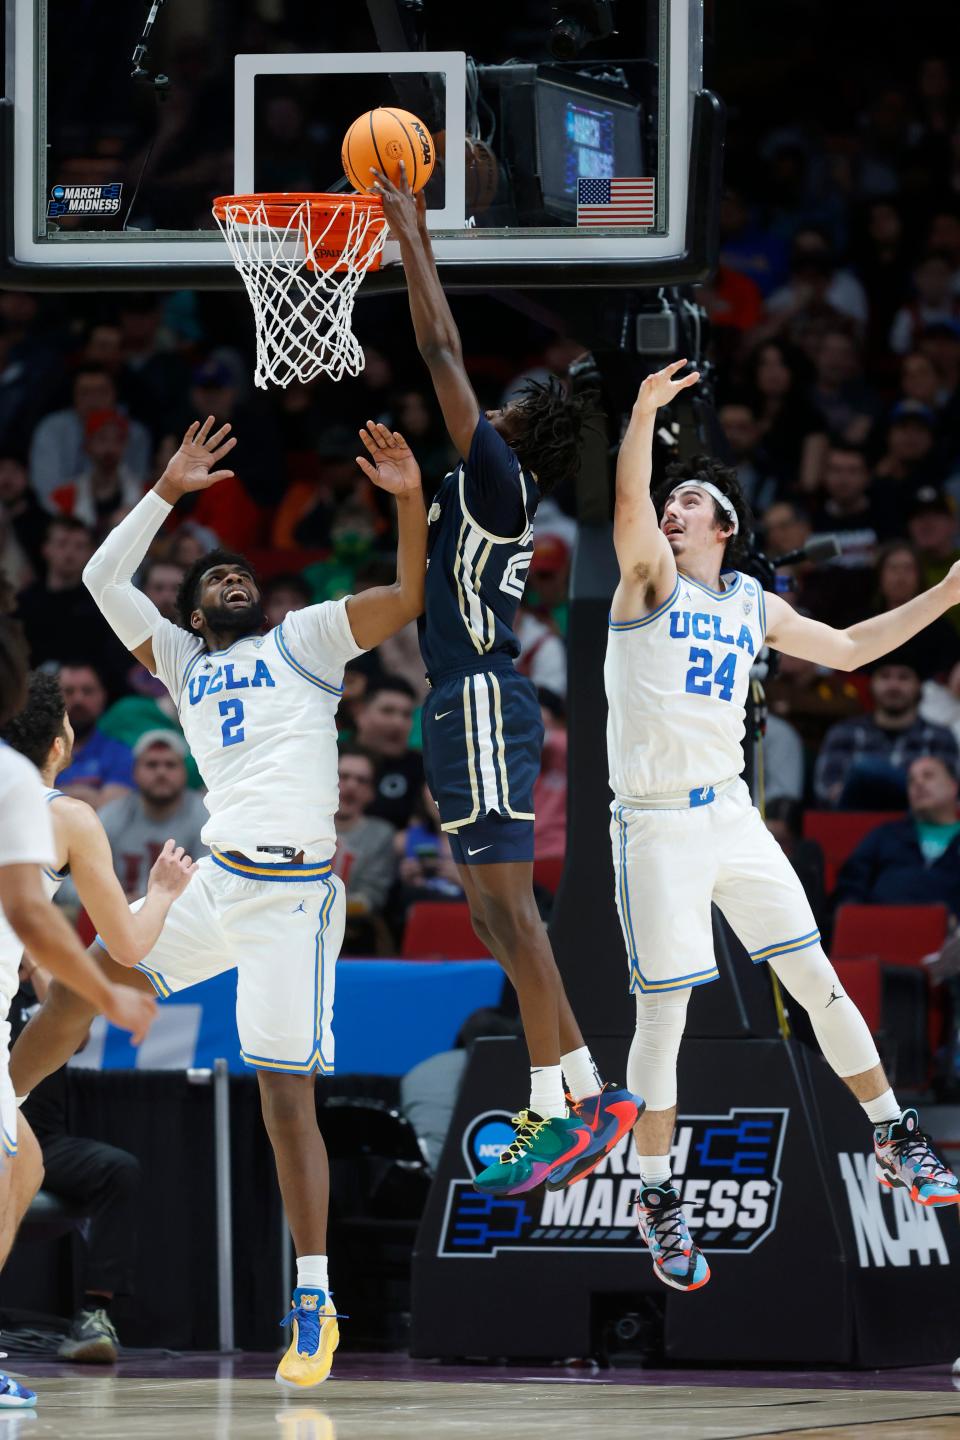 Akron forward Ali Ali, center, dunks as UCLA forward Cody Riley (2) and UCLA guard Jaime Jaquez Jr. (24) defend during a first-round NCAA college basketball tournament game March 17, 2022, in Portland, Ore.